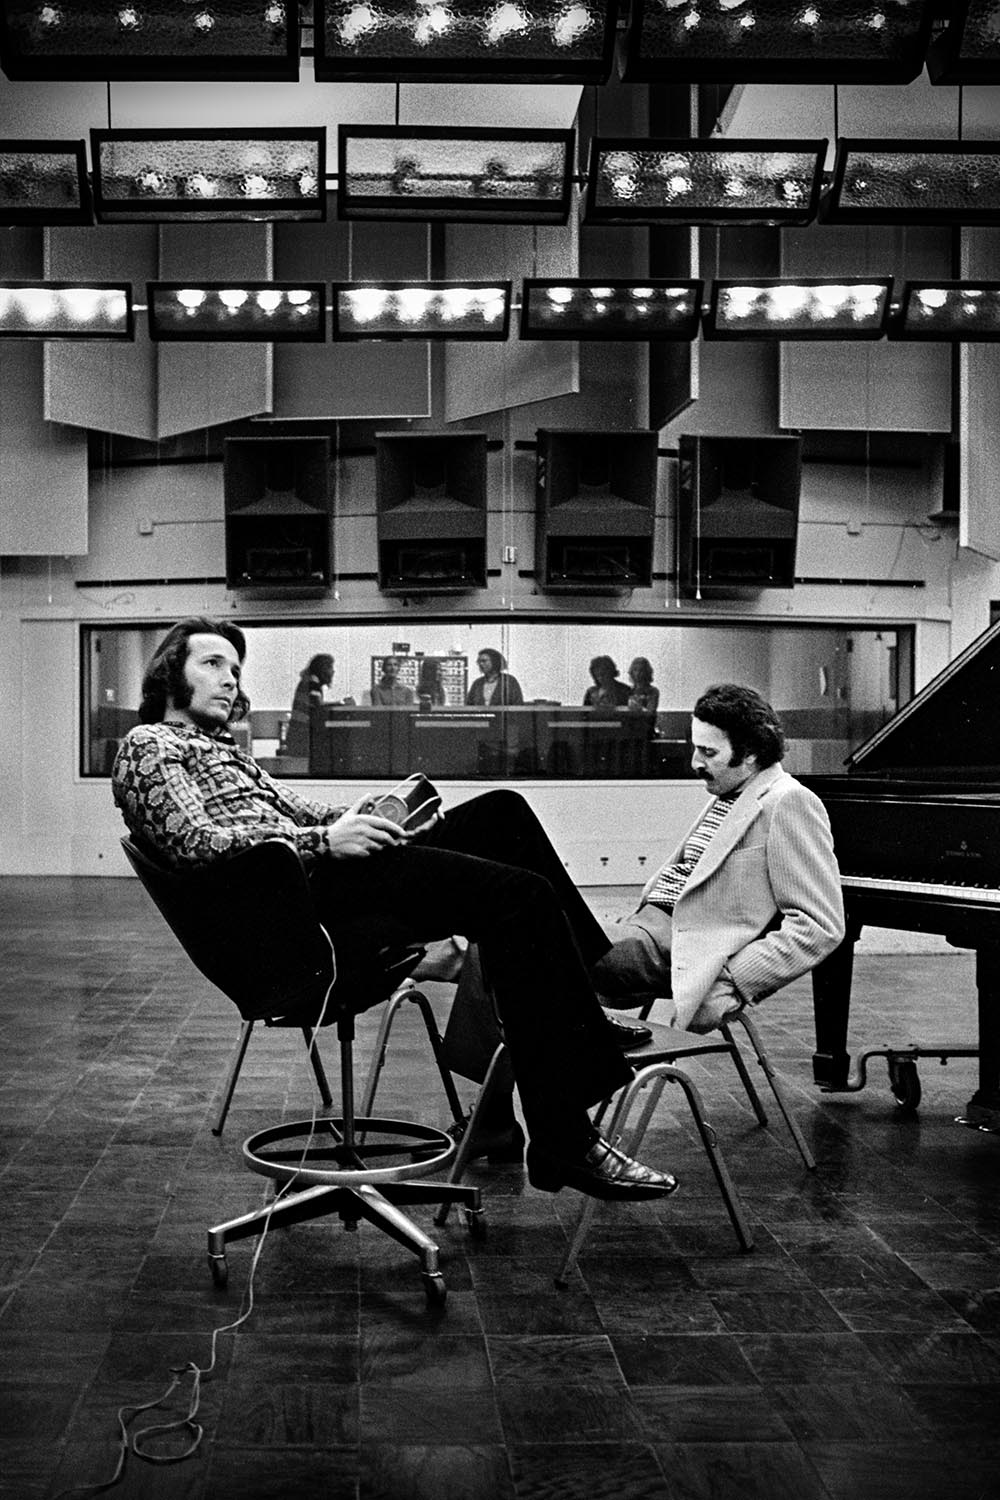  HERB ALPERT and JERRY MOSS     Co-founders of A&amp;M RECORDS, at a recording session, Hollywood, California, 1970    